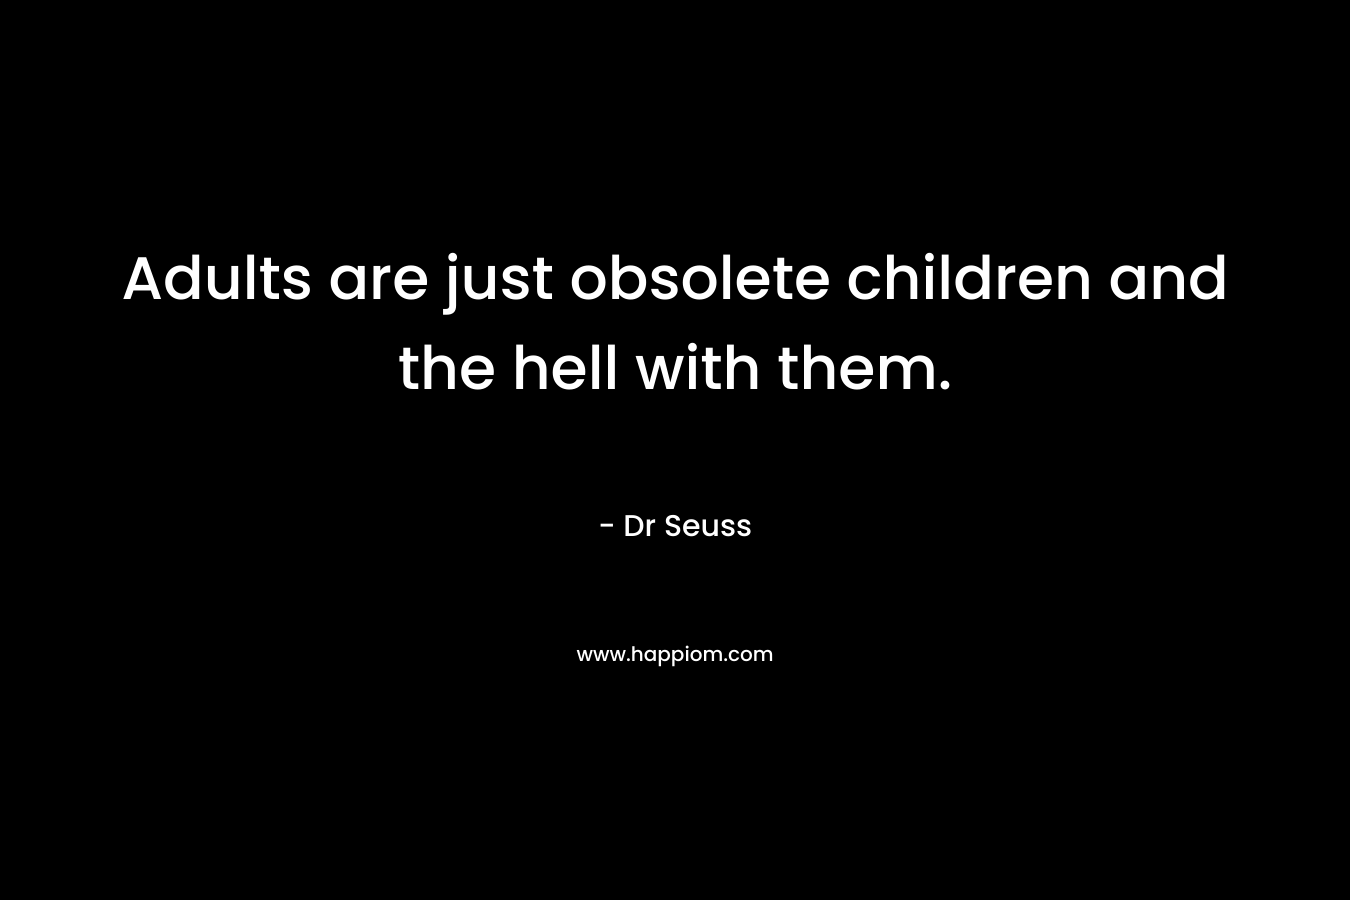 Adults are just obsolete children and the hell with them.